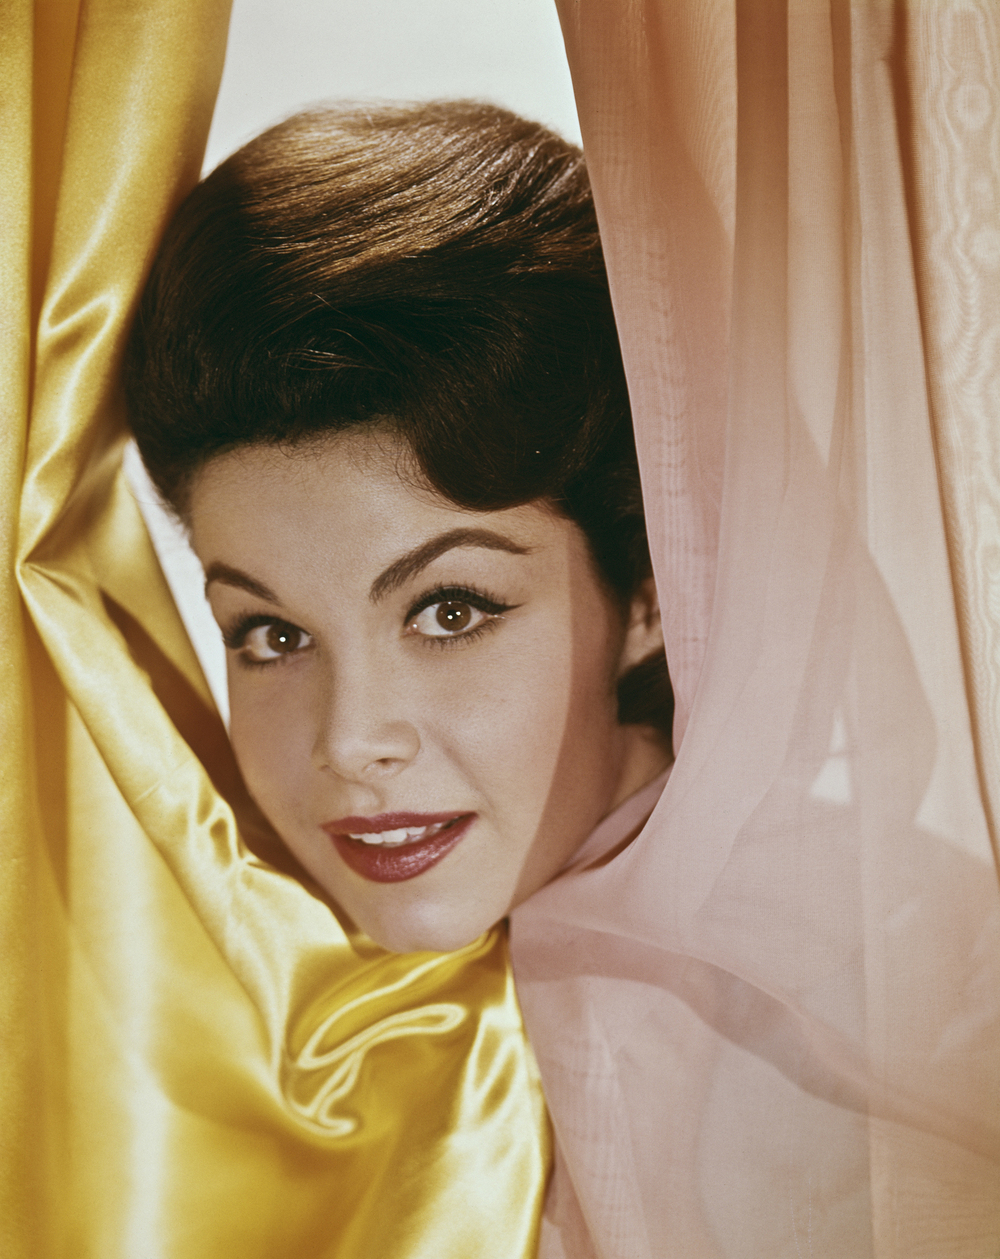 The American actress and singer Annette Funicello, photographed here circa 1960, died April 8, more than two decades after being diagnosed with multiple sclerosis. (Getty Images)